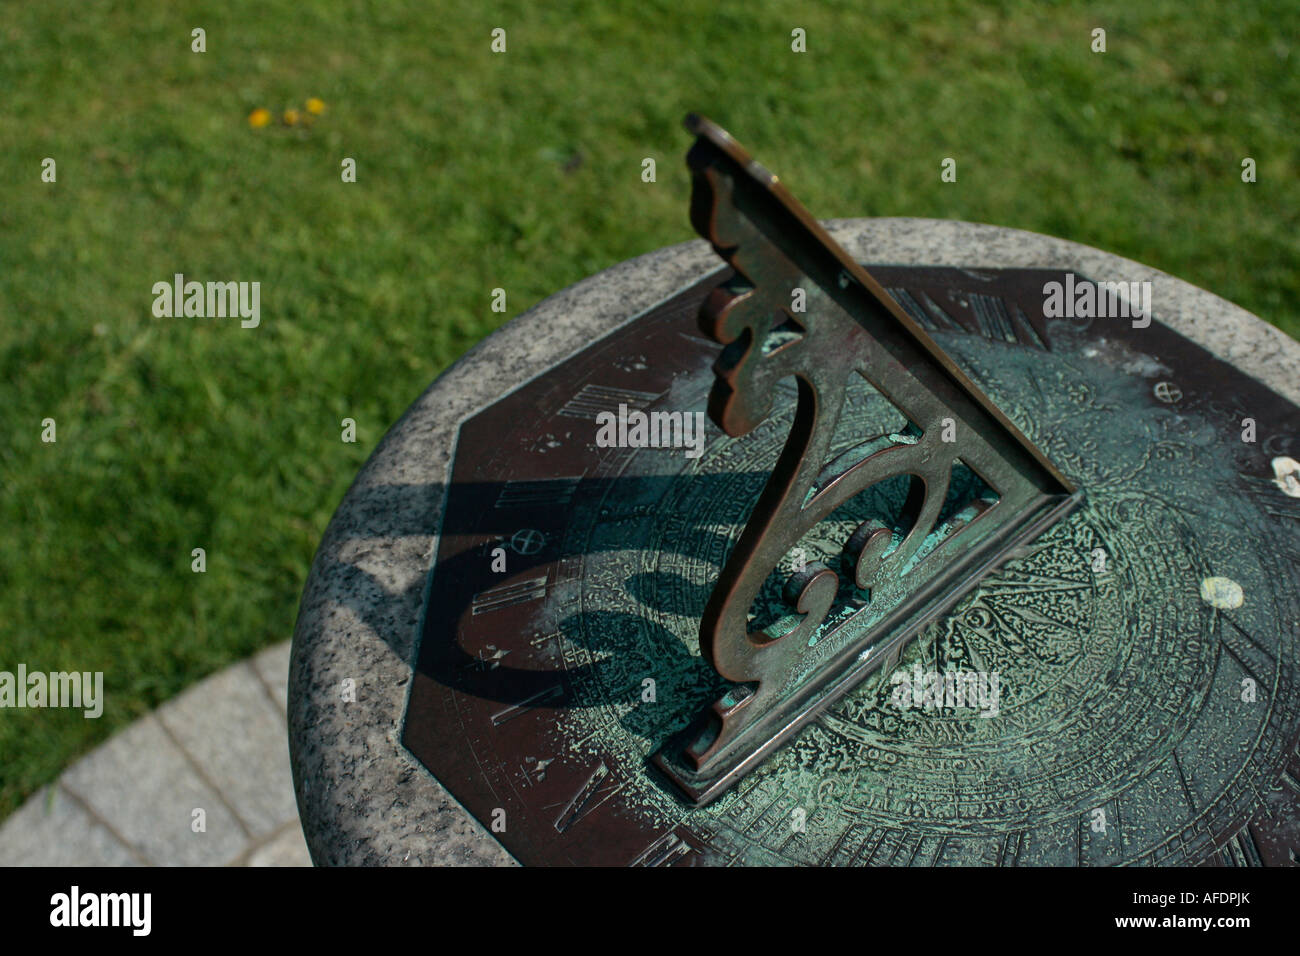 Sundial, copper metal on granite stand surrounded by green grass lawn Stock Photo